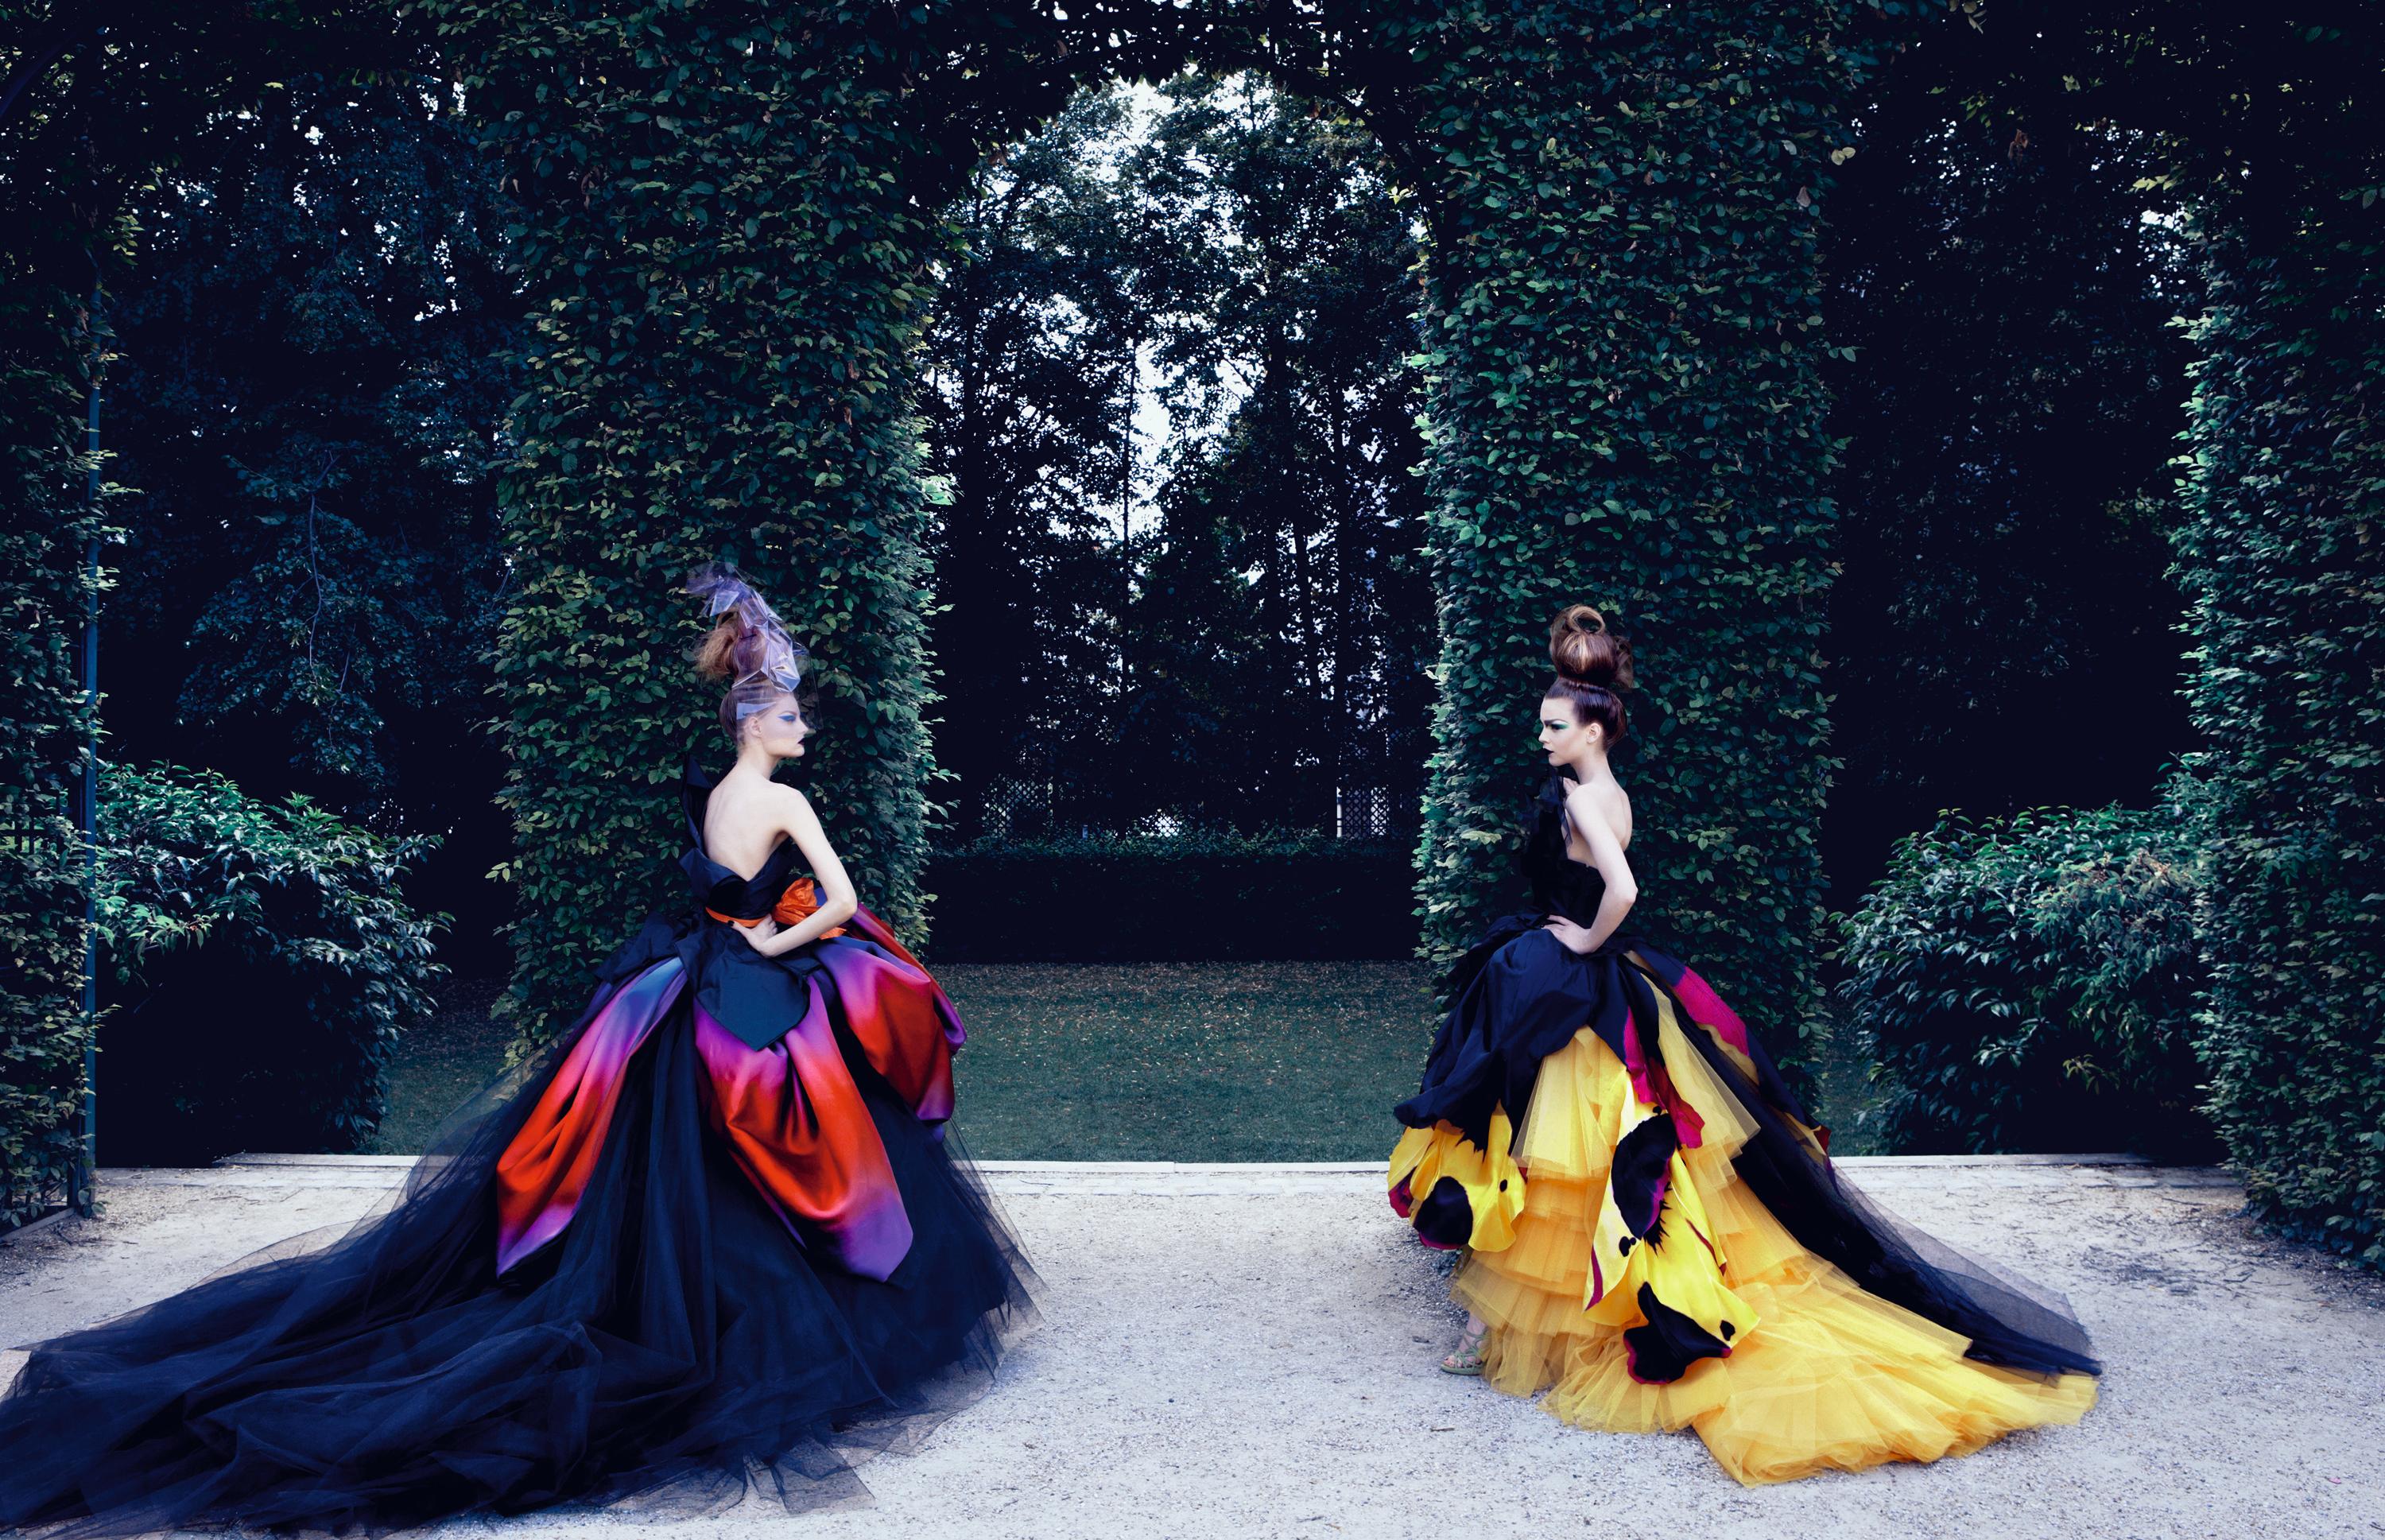 Christian Dior Haute Couture Fall / Winter 2010, 2011 - Photograph by Patrick Demarchelier